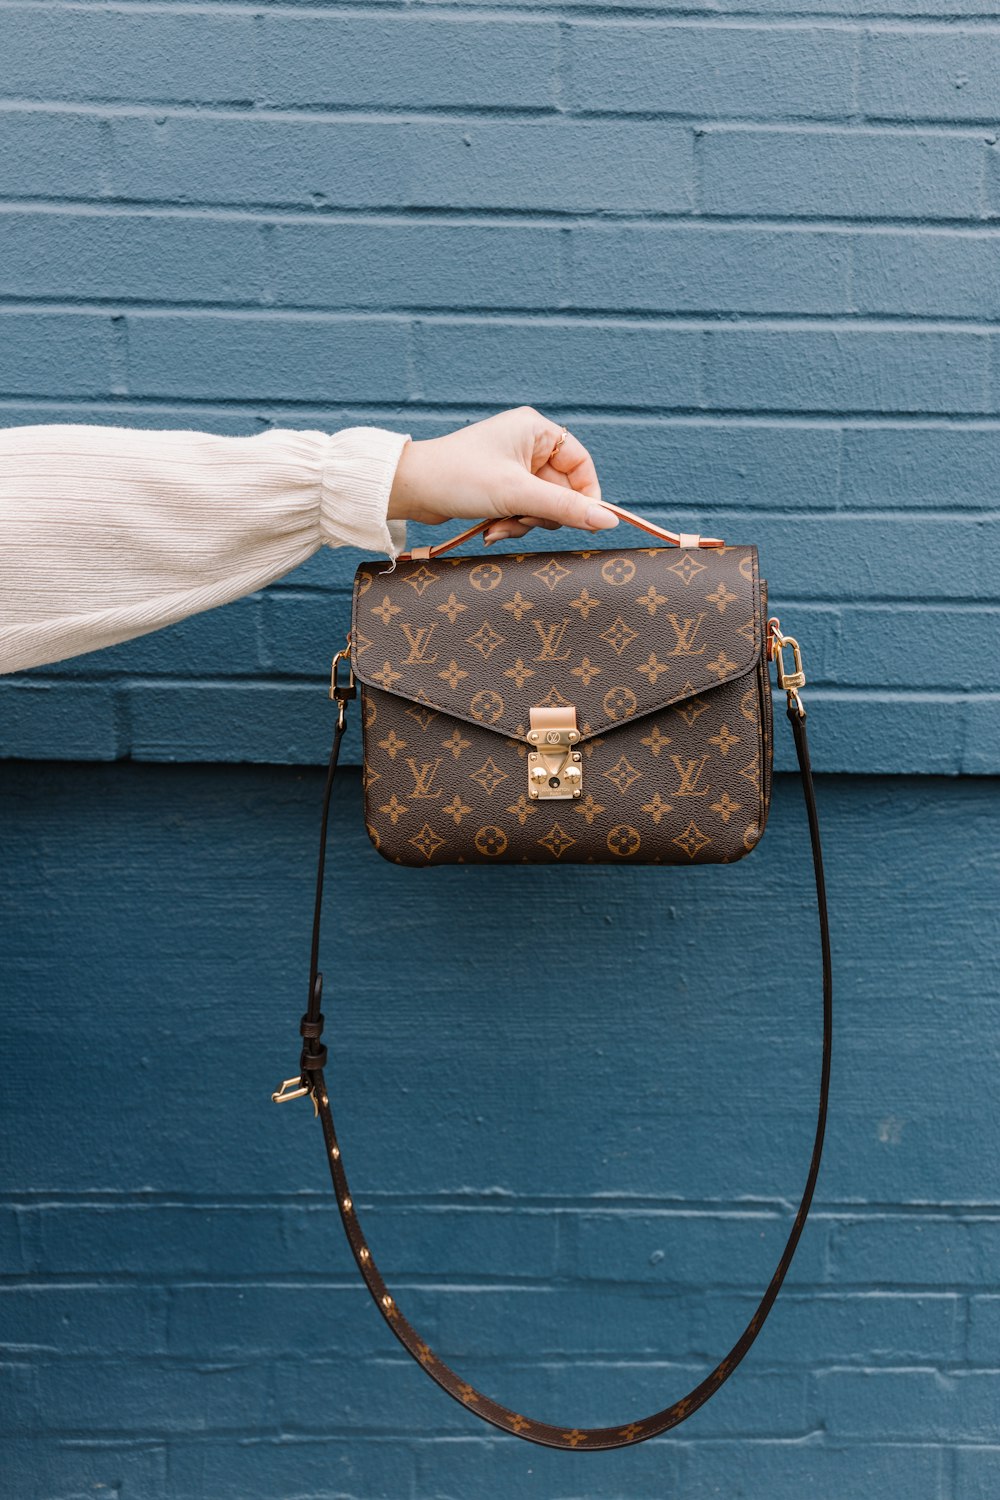 Fashion Bags Pictures  Download Free Images on Unsplash